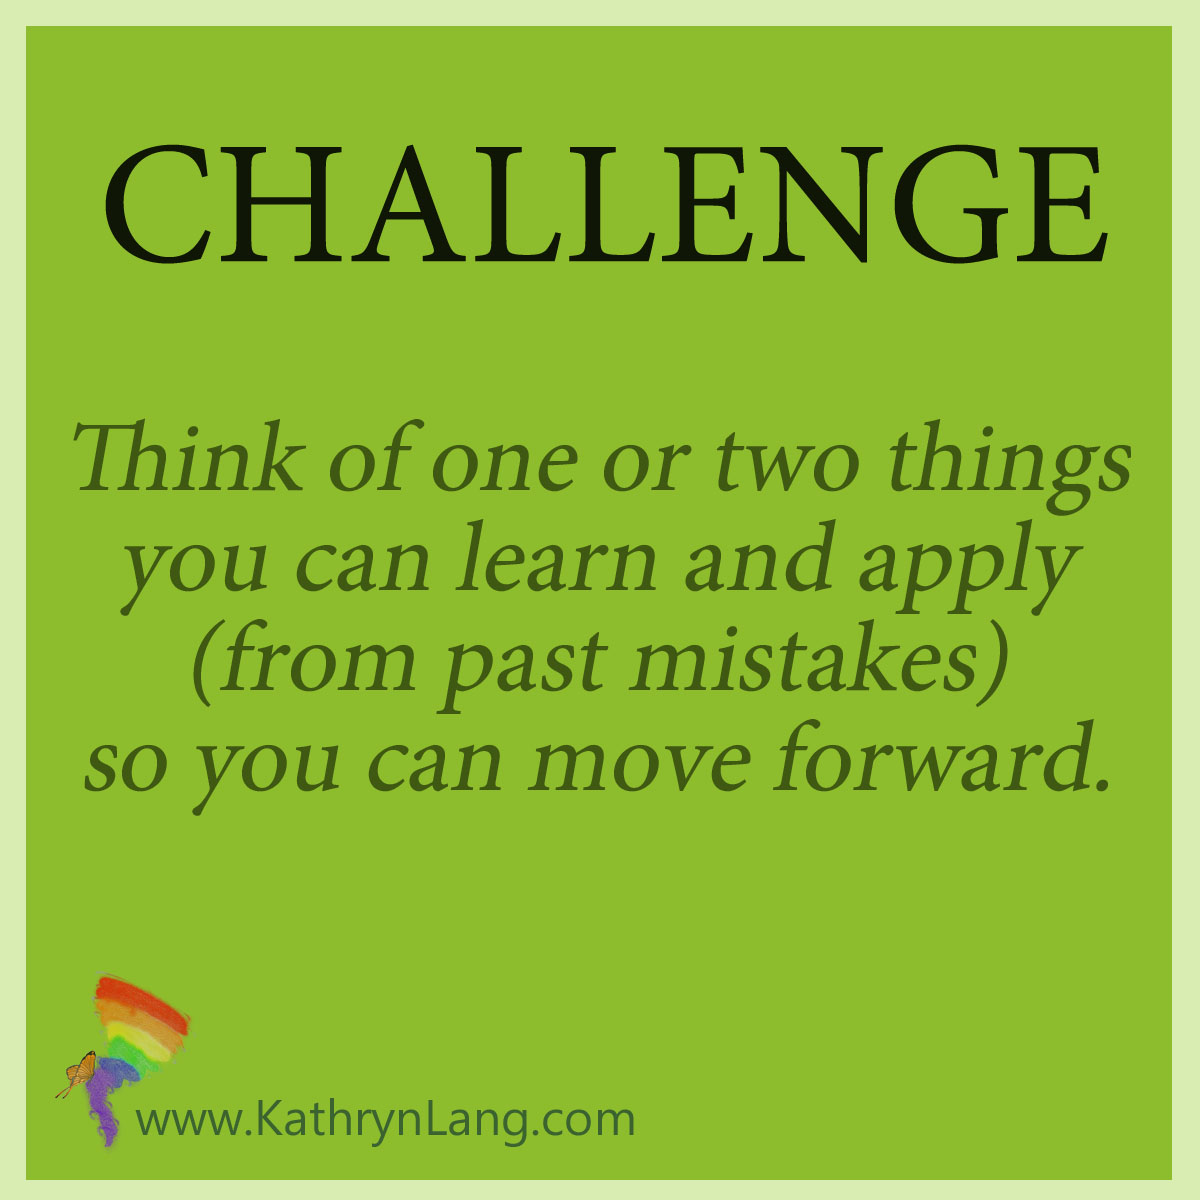 Daily challenge - learn from mistakes